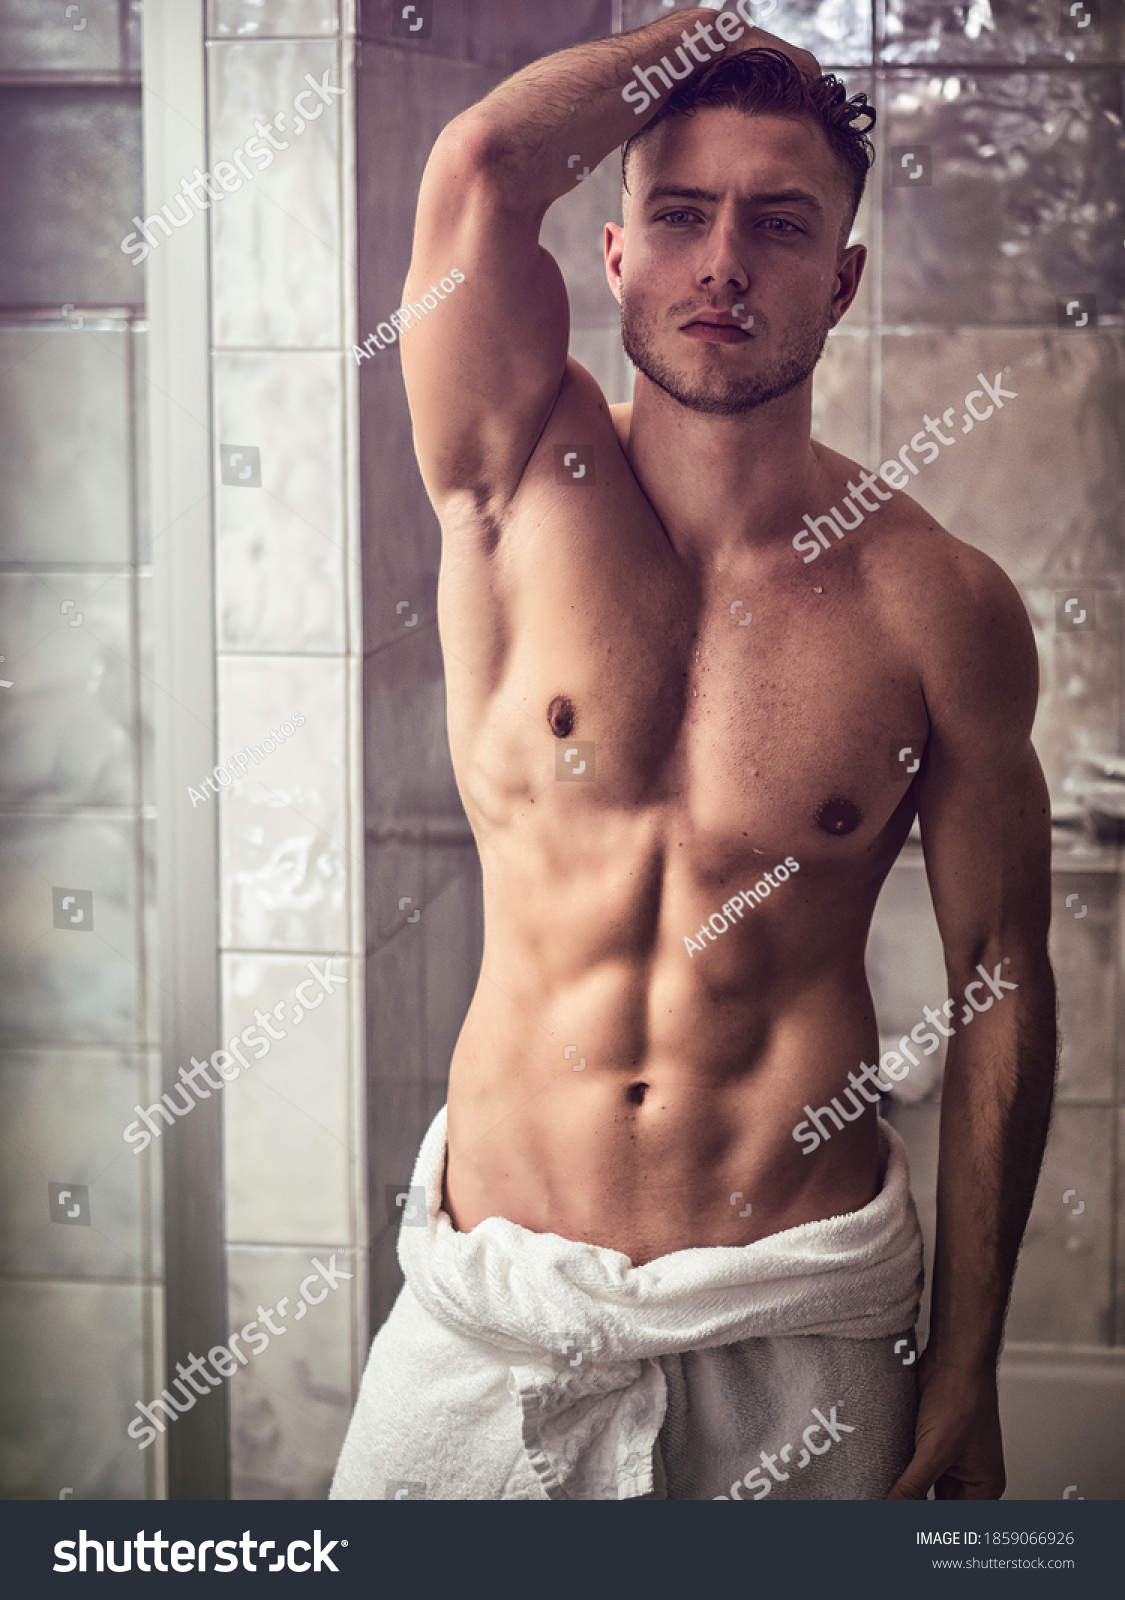 Shirtless muscular handsome man looking at himself in bathroom mirror in the morning after shower or bath, with towel around his waist #1859066926